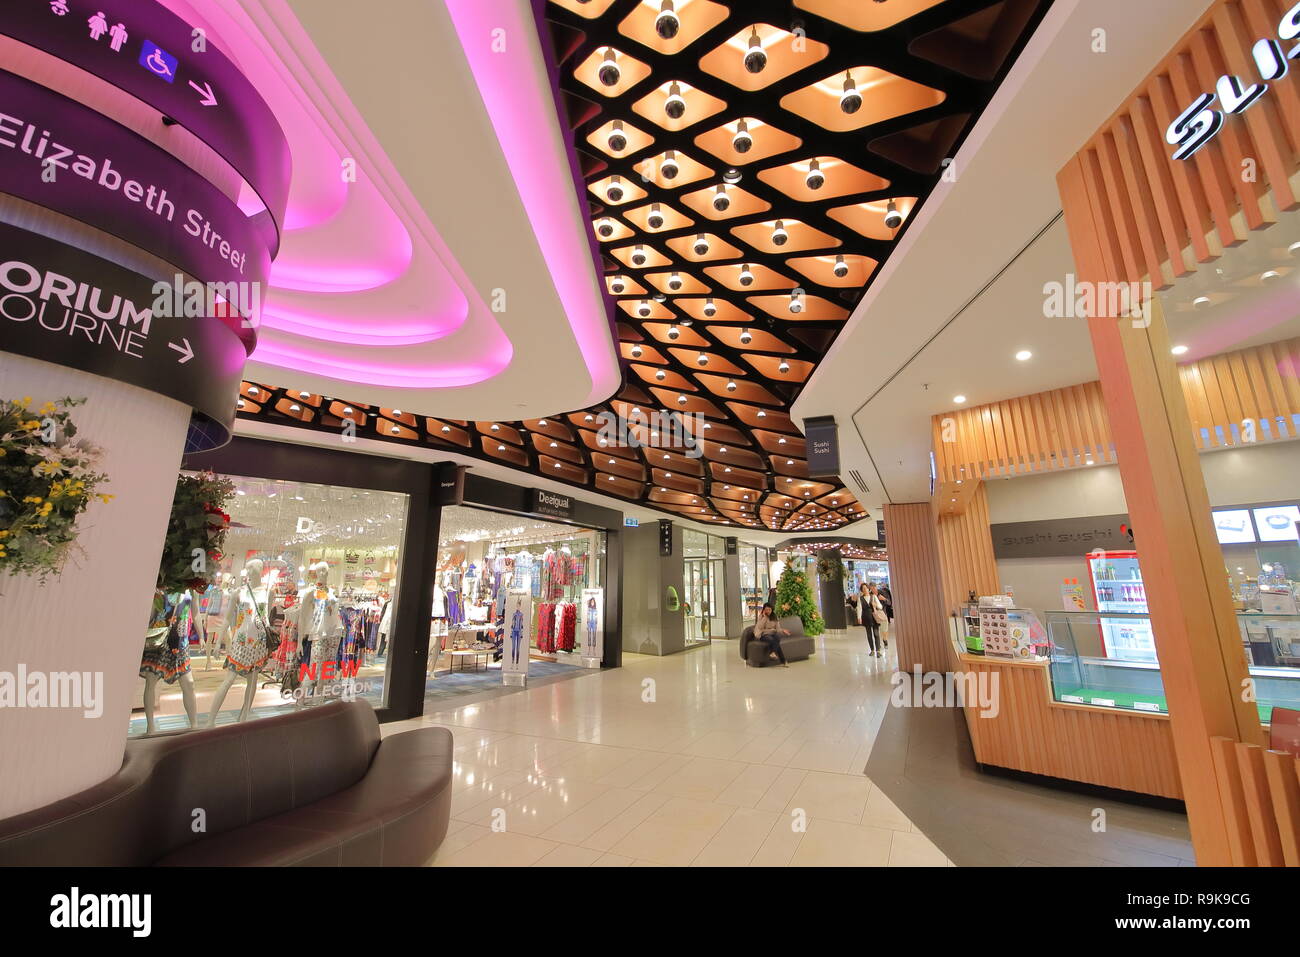 People visit The Strand shopping mall in Melbourne Australia Stock Photo -  Alamy